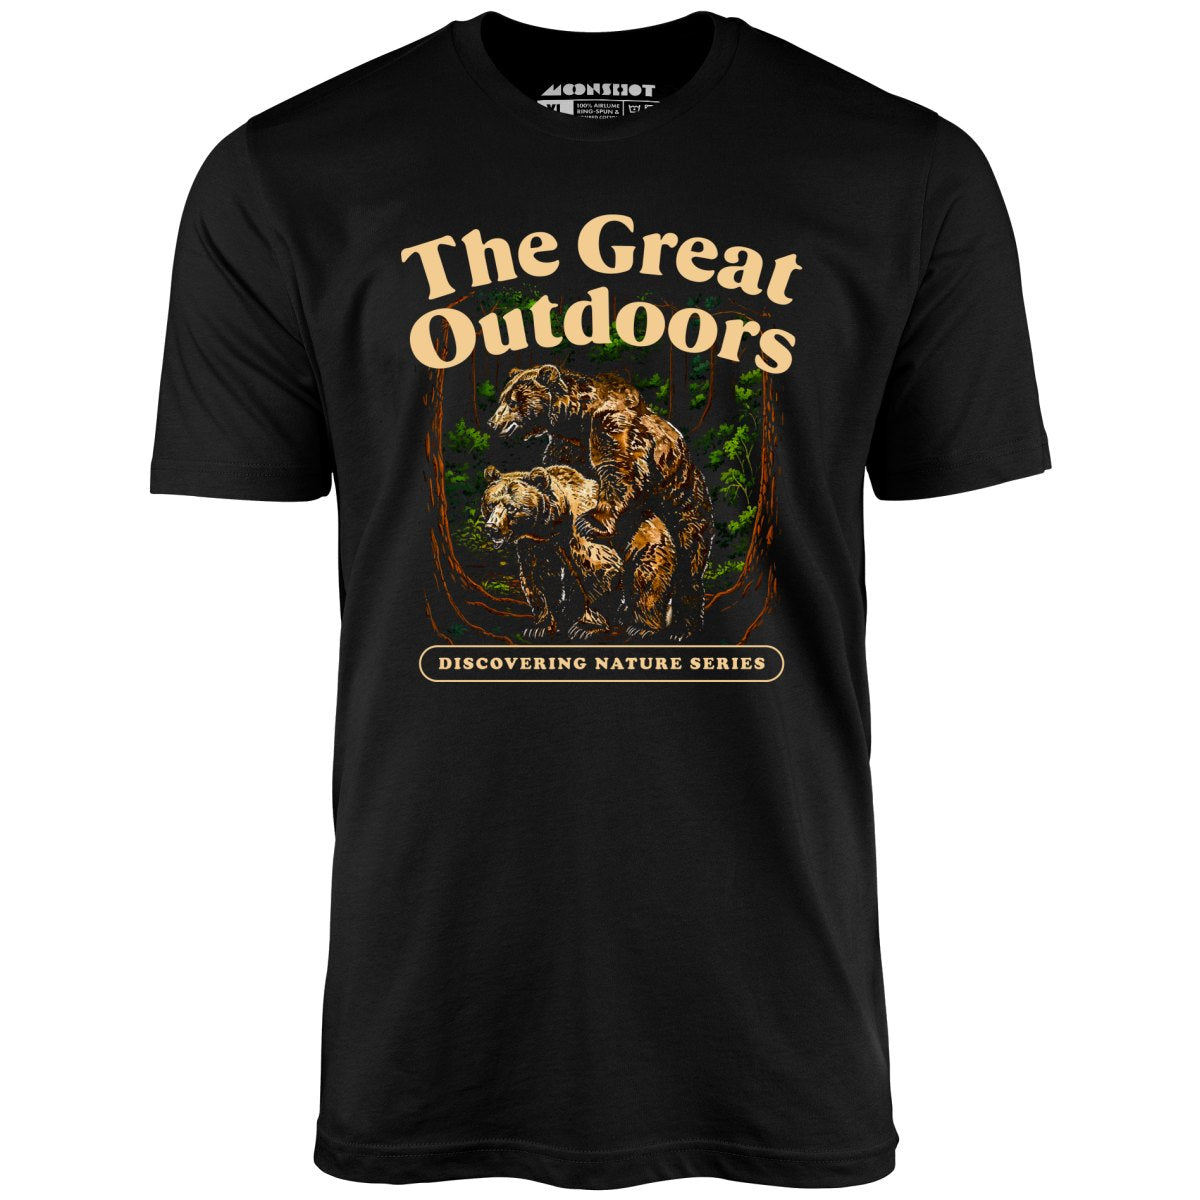 The Great Outdoors - Unisex T-Shirt